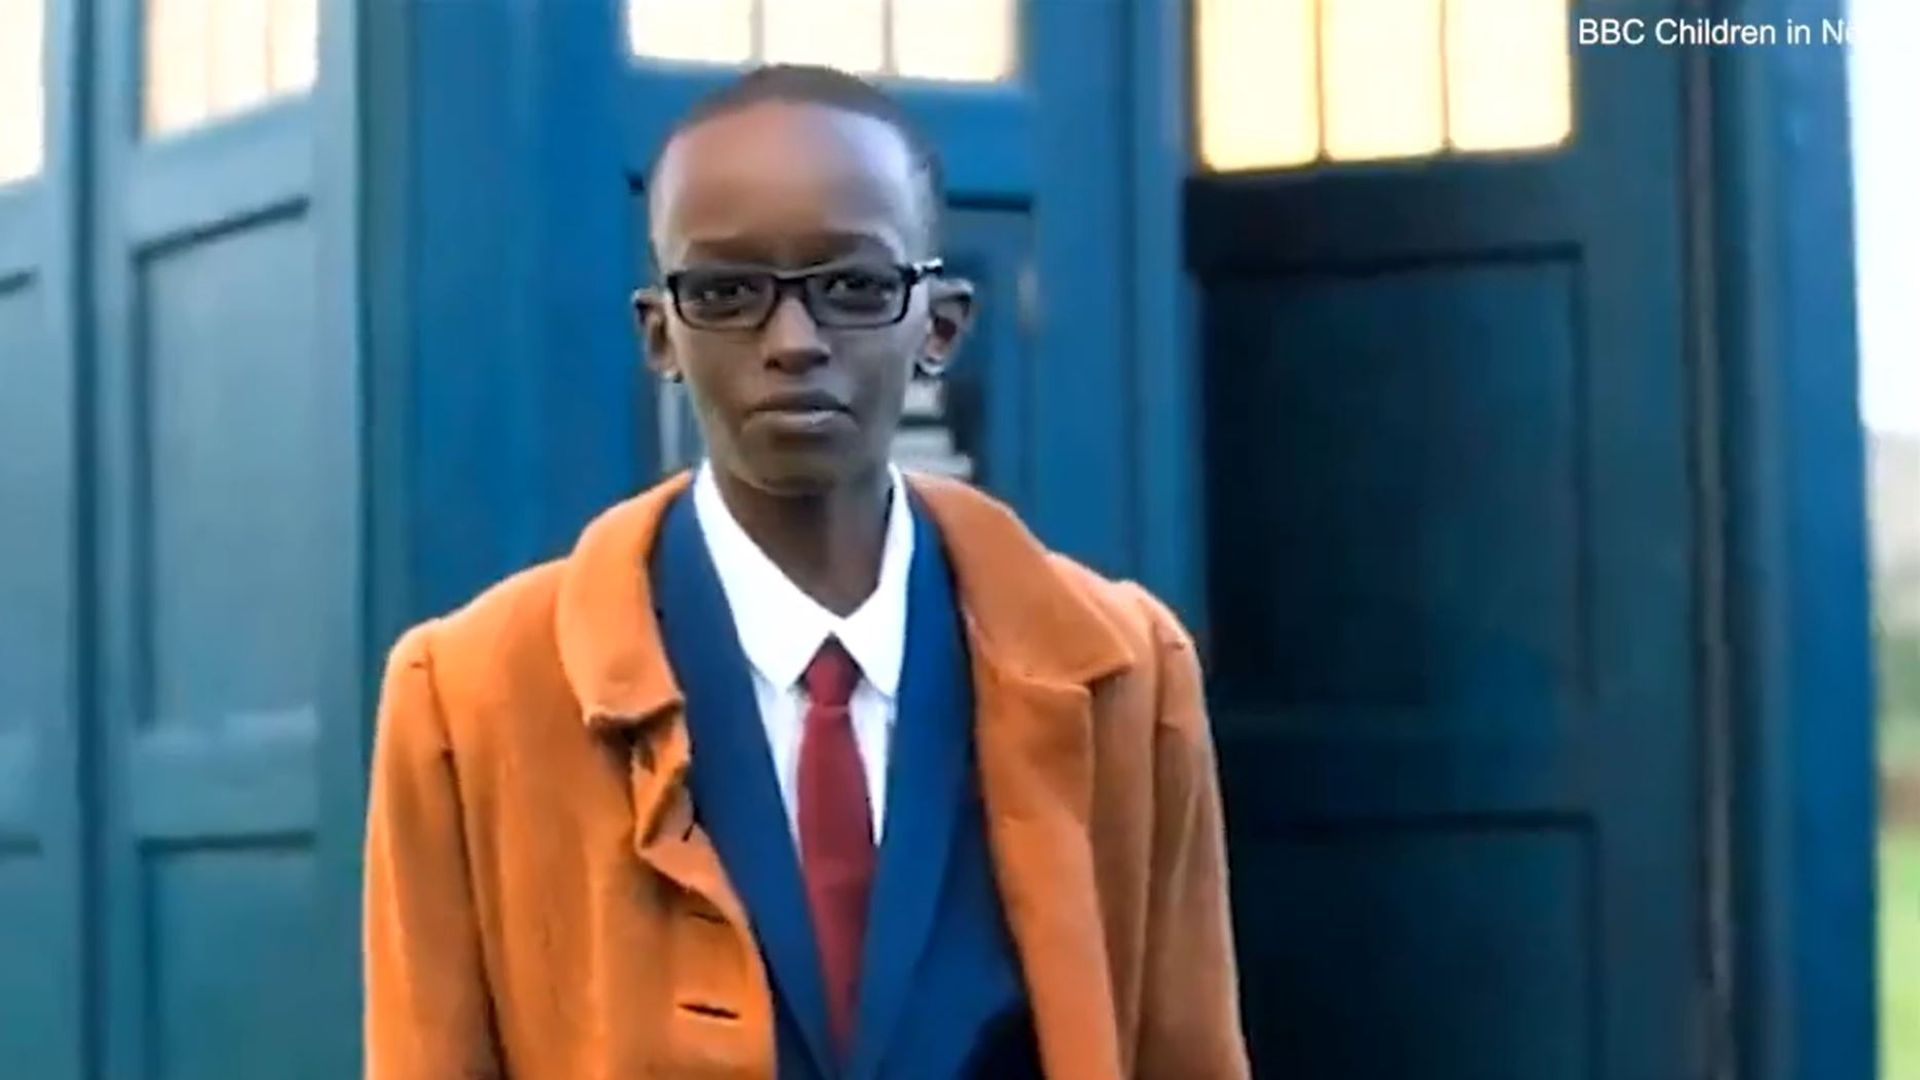 BBC removes Doctor Who-themed advert that starred Southport stabbing suspect